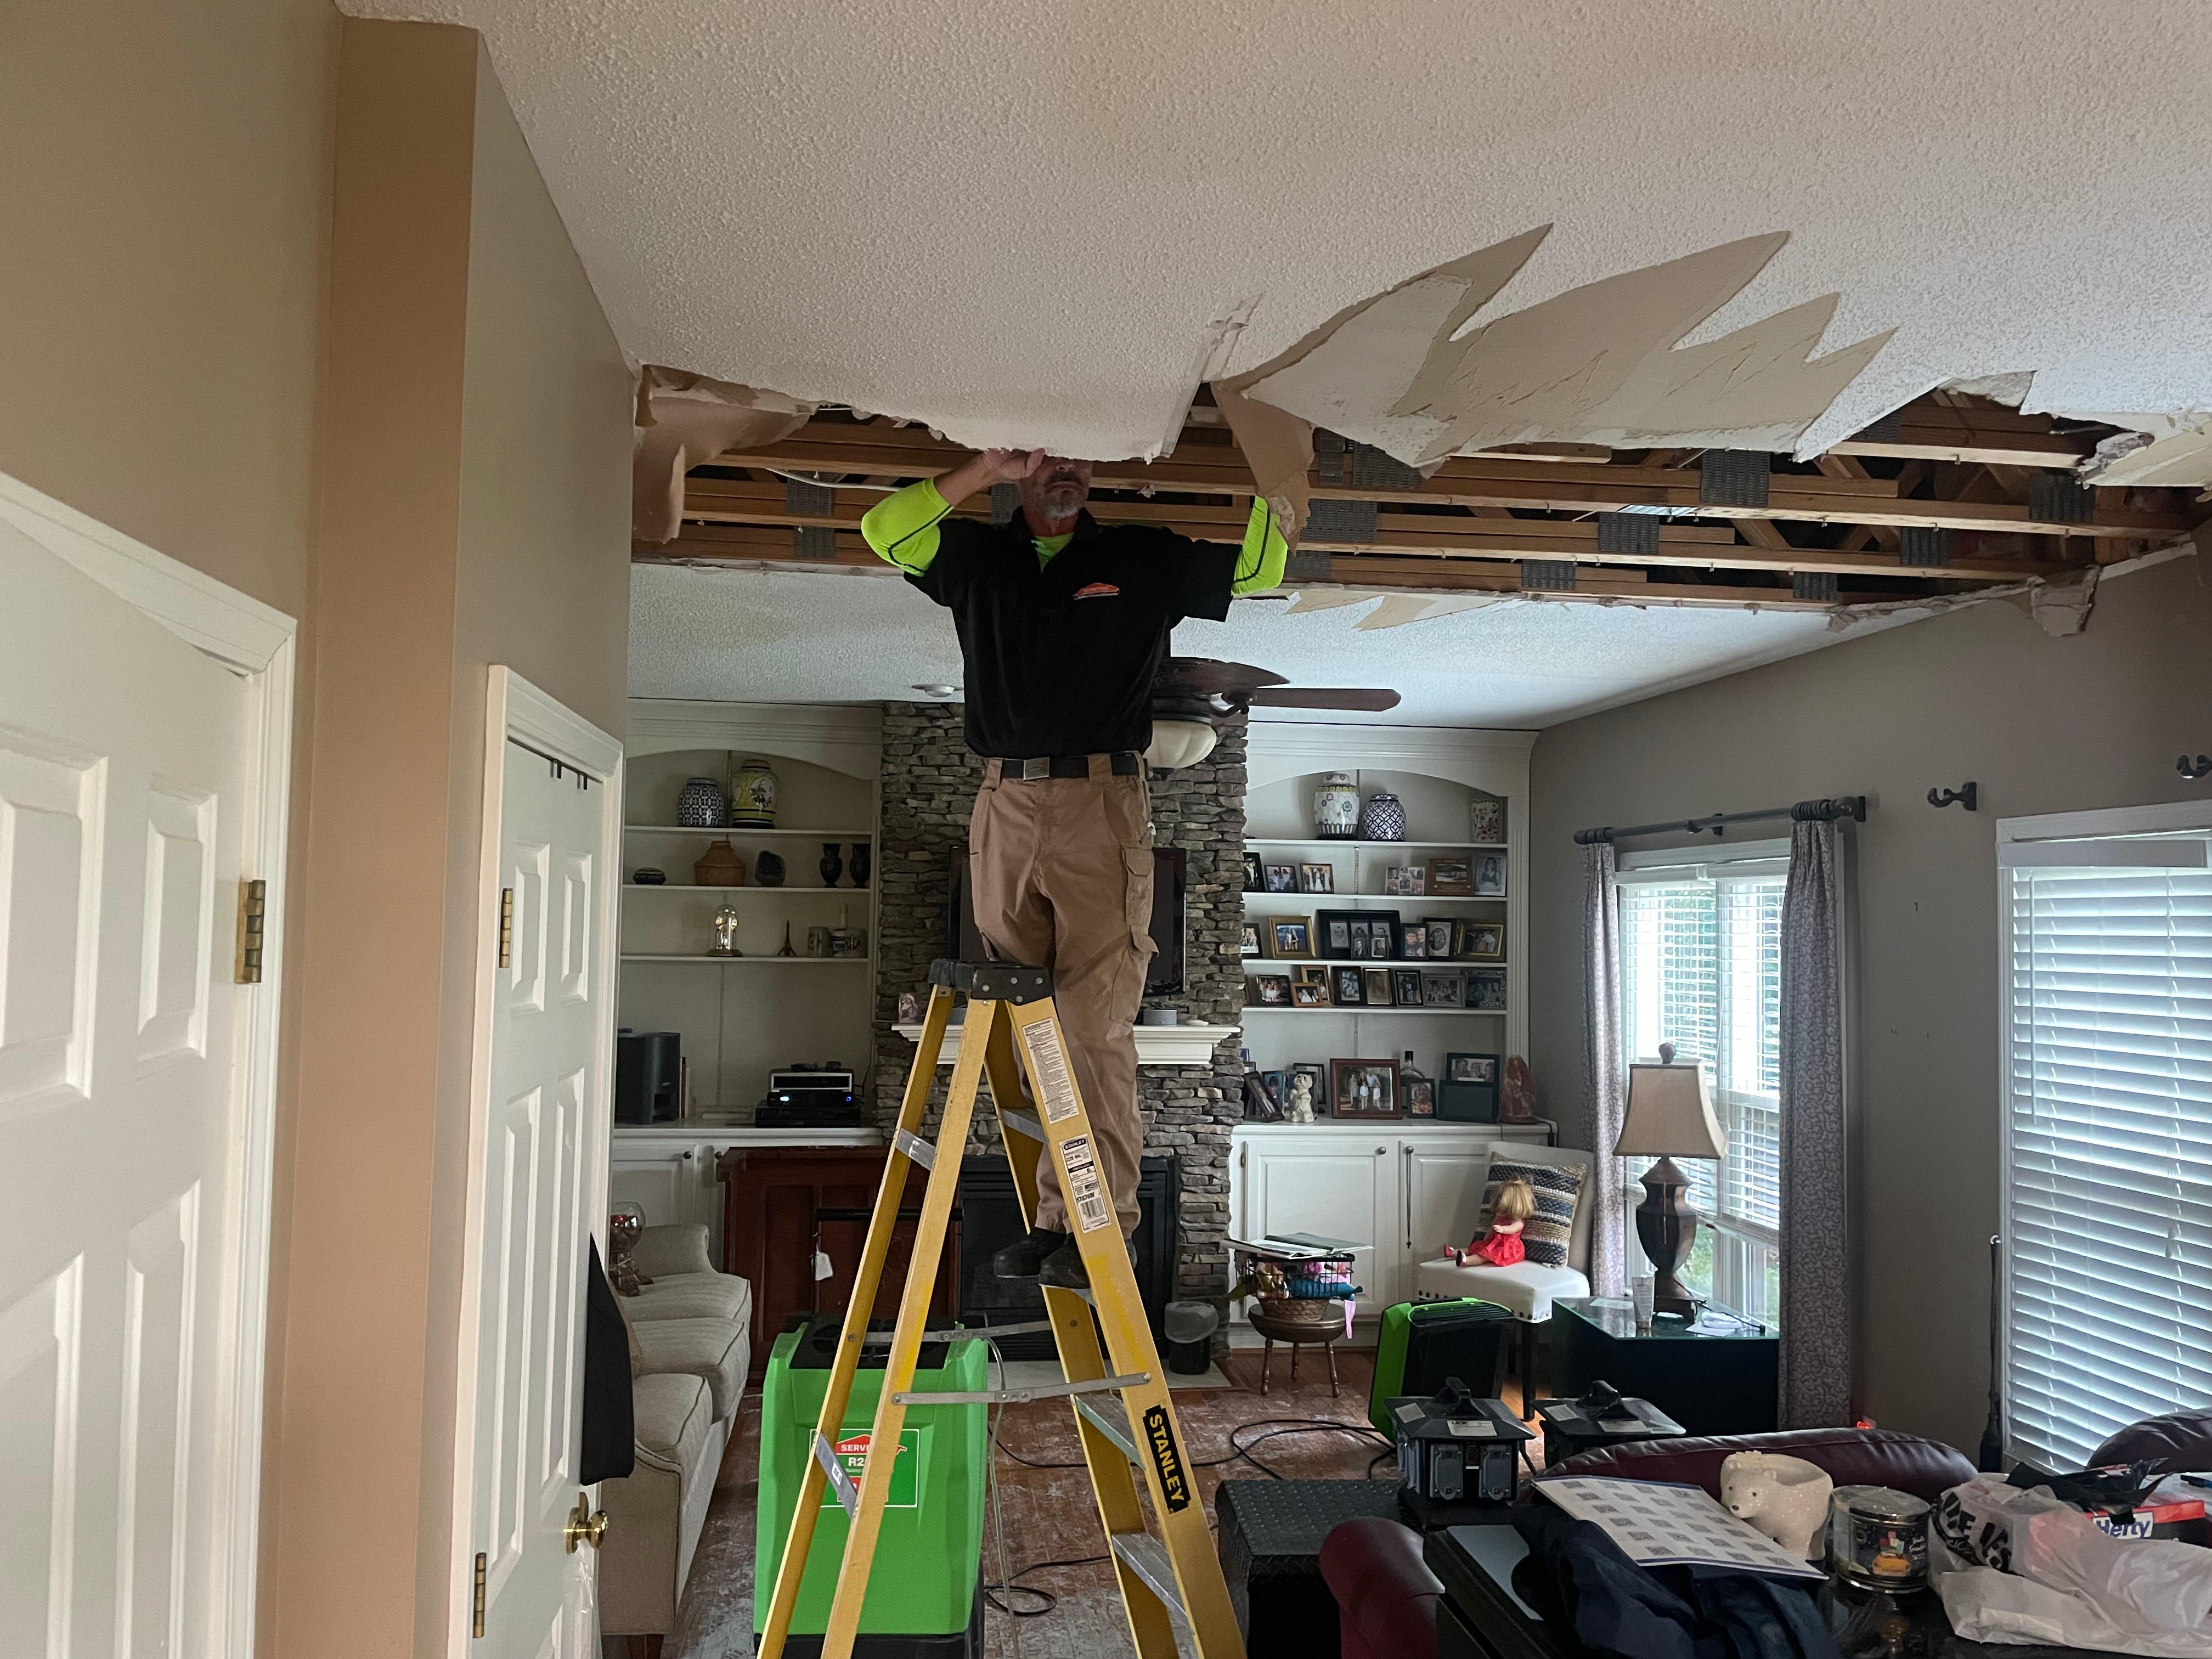 Our SERVPRO technicians are highly trained and experienced in water and storm damage cleanup and restoration. If your home or business suffers from any damage, just give our SERVPRO team a call!